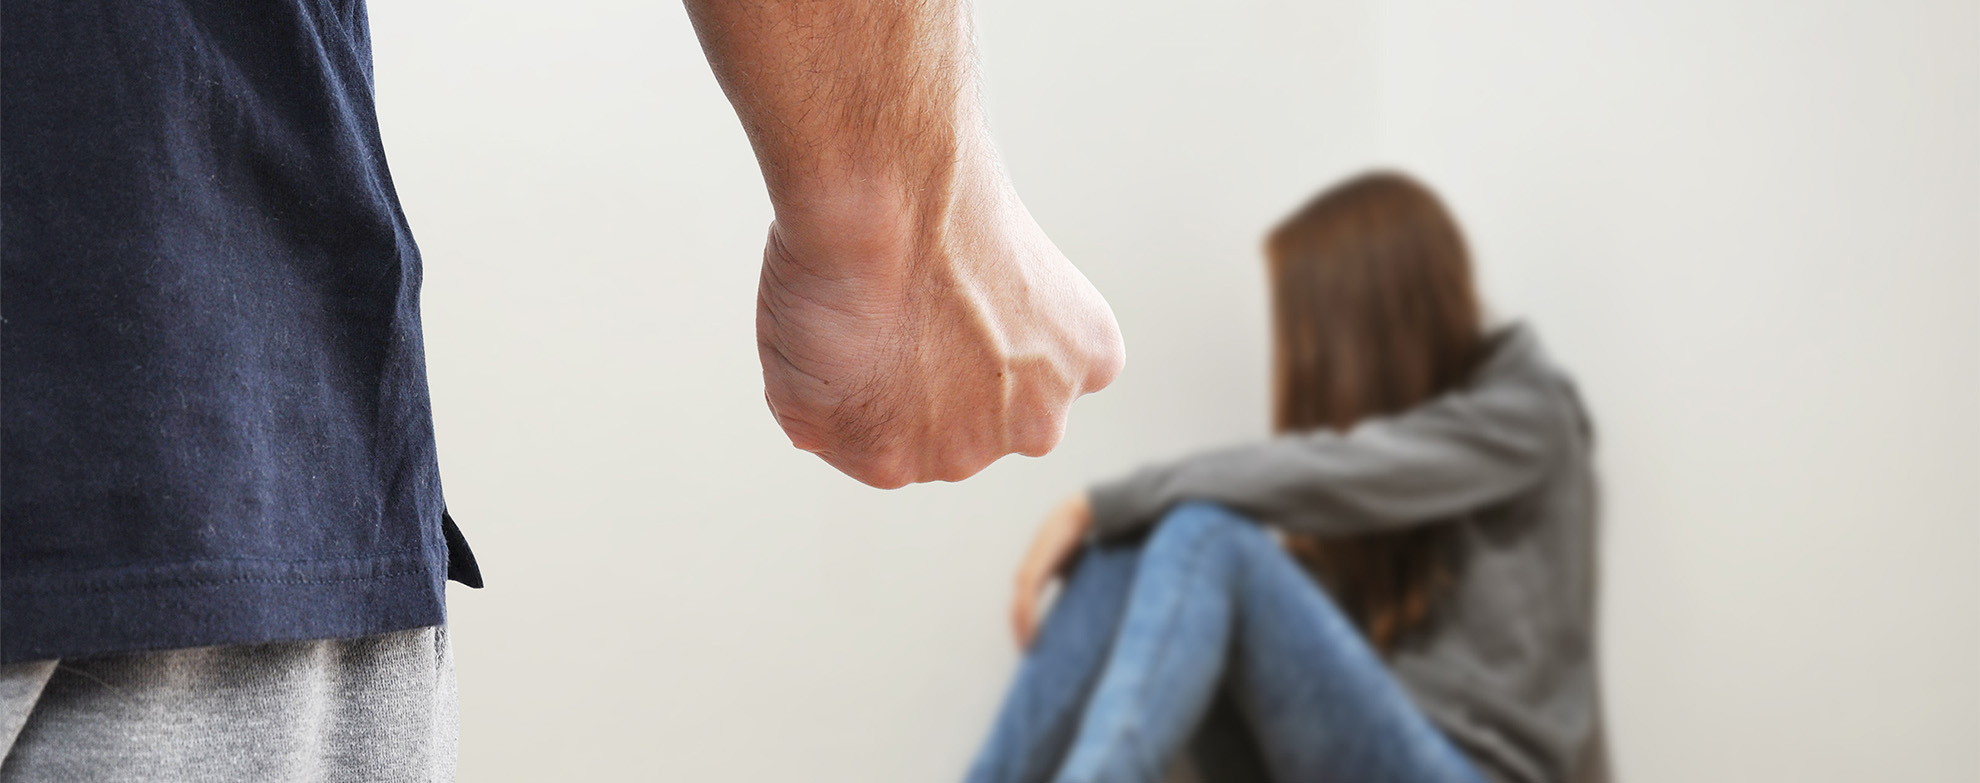 Fist of adult man prepared to hurt the child because of domestic violence